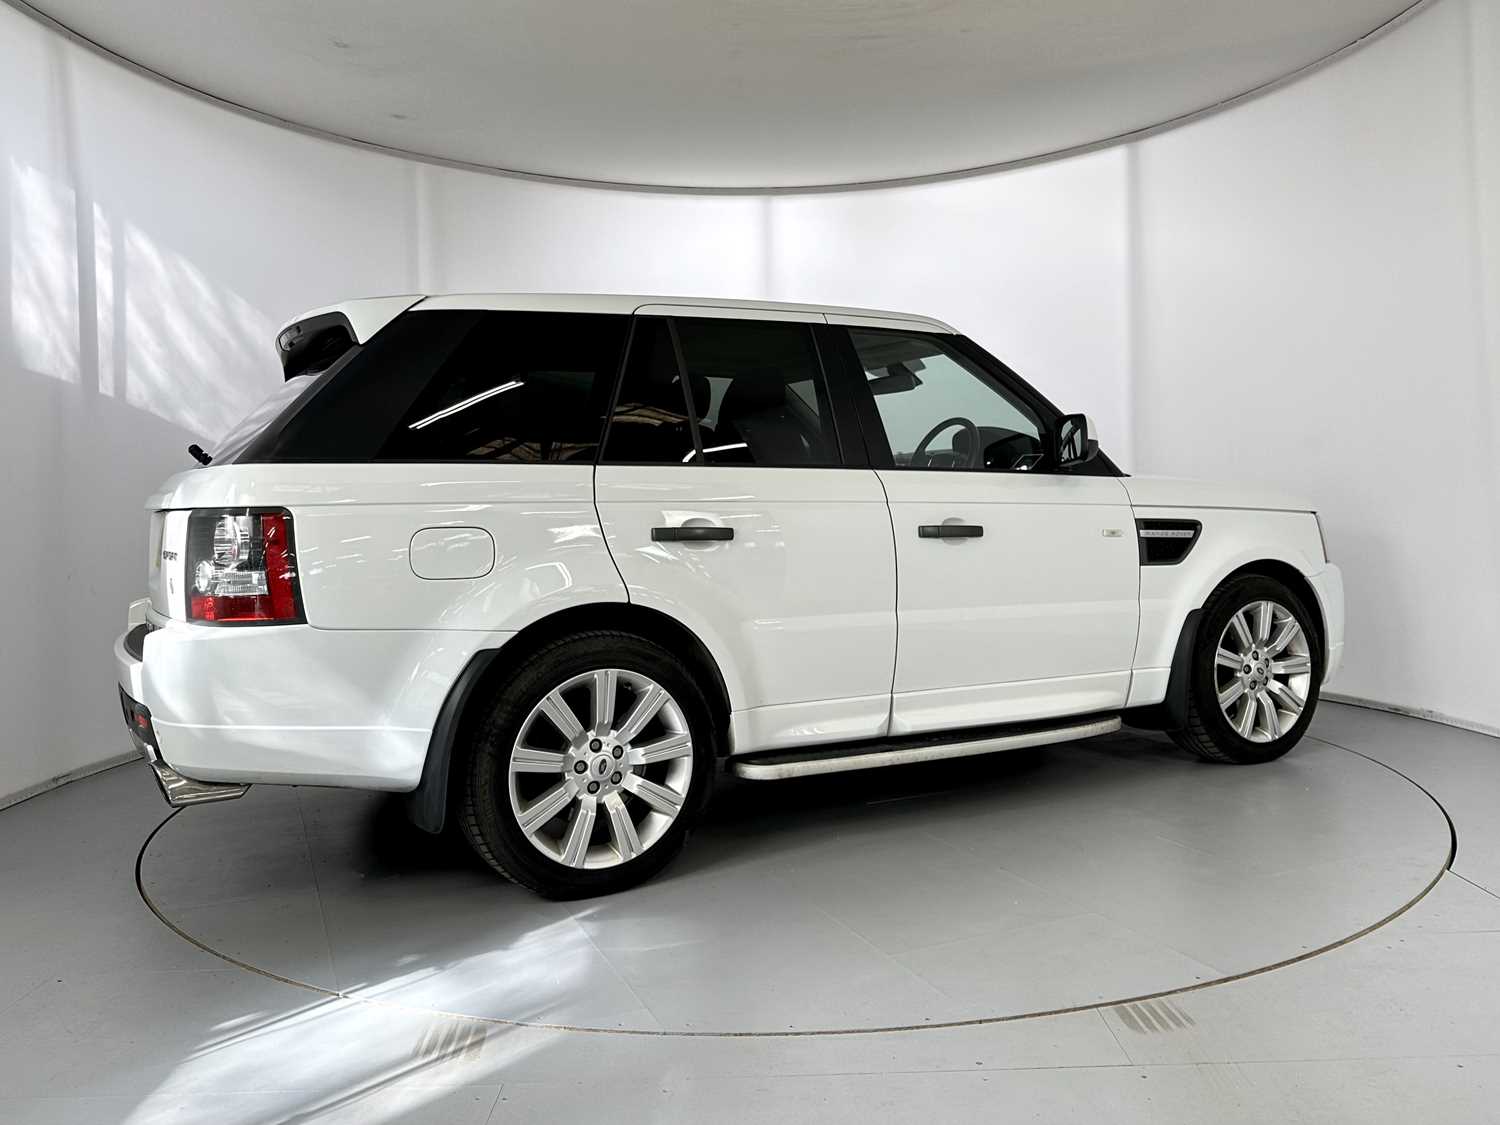 2011 Land Rover Range Rover Sport Stormer Edition  - Image 10 of 33